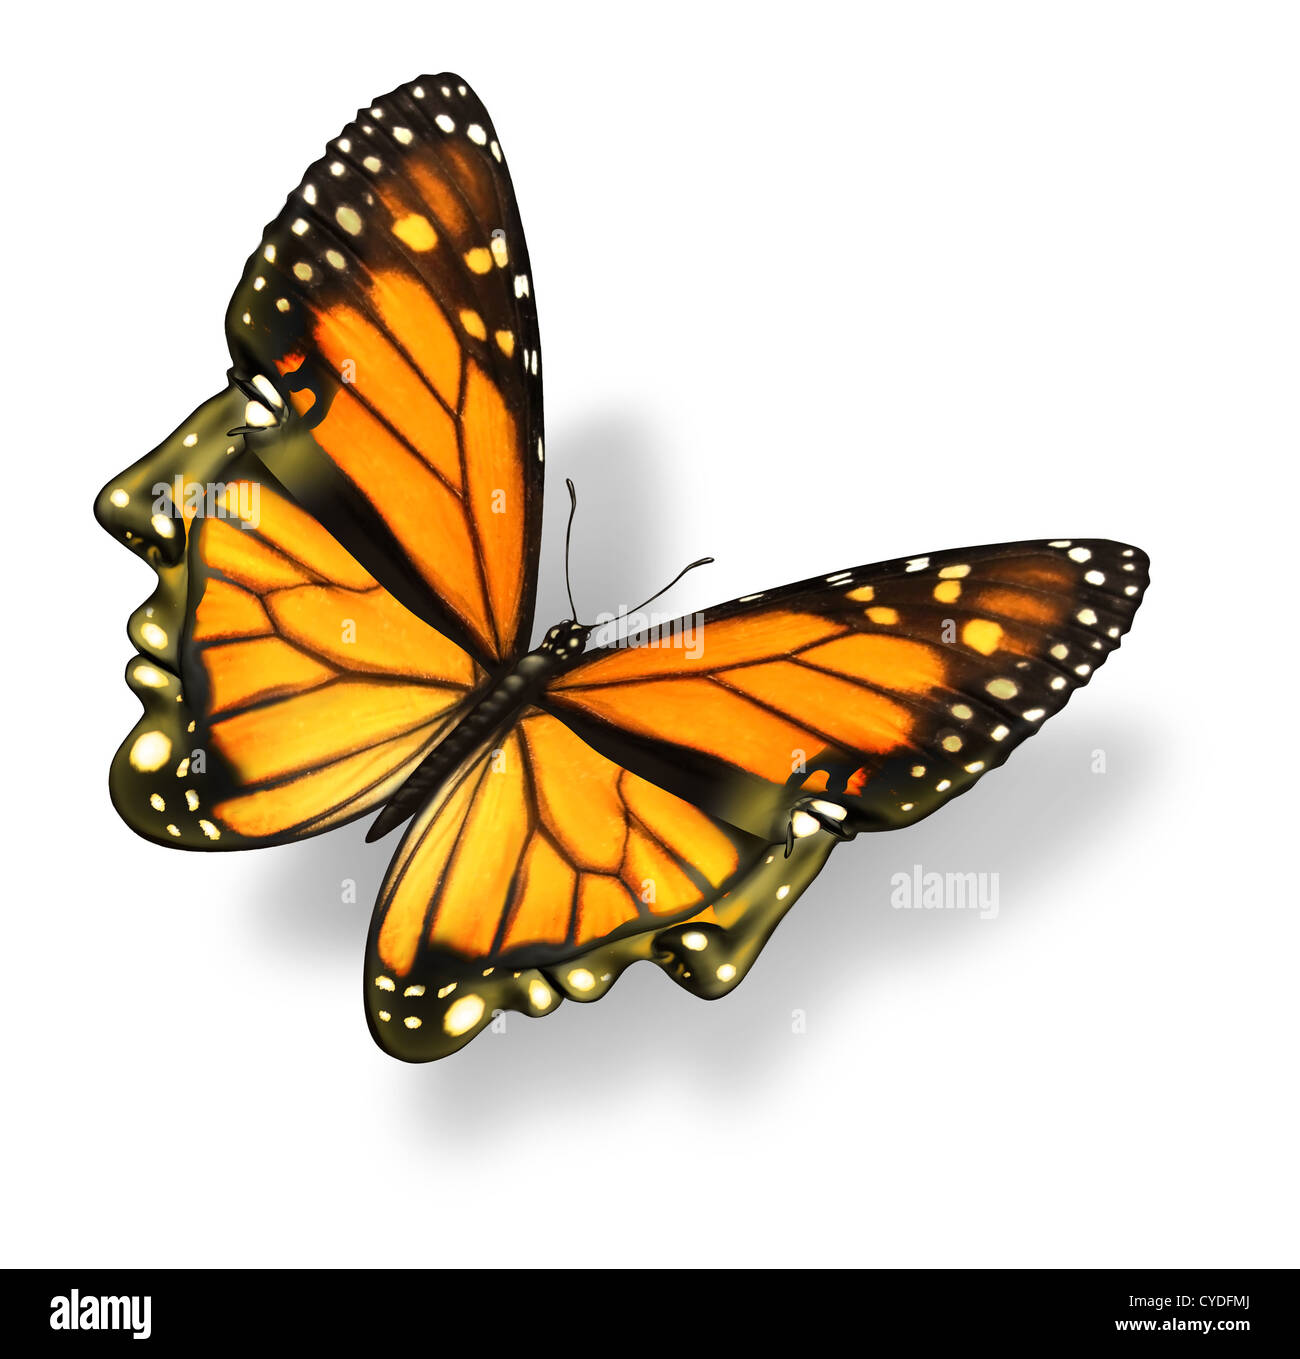 Human freedom and free your mind medical health care concept with a monarch butterfly insect in the shape of a human head Stock Photo